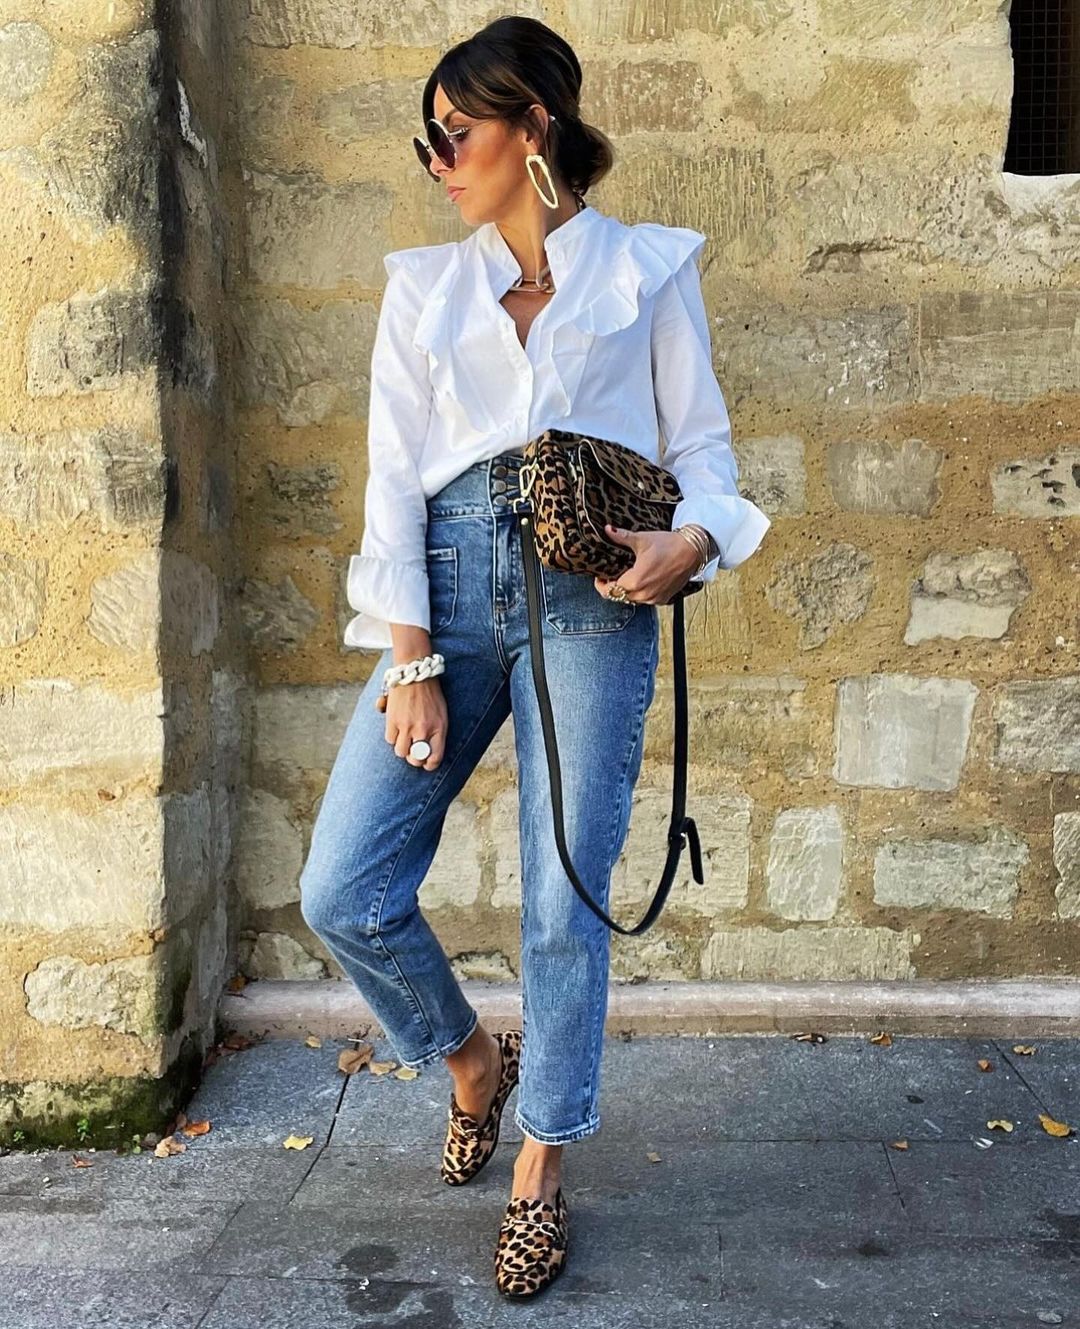 31 Chic Fall Styles for Women: Fashionable Outfits for Every Occasion